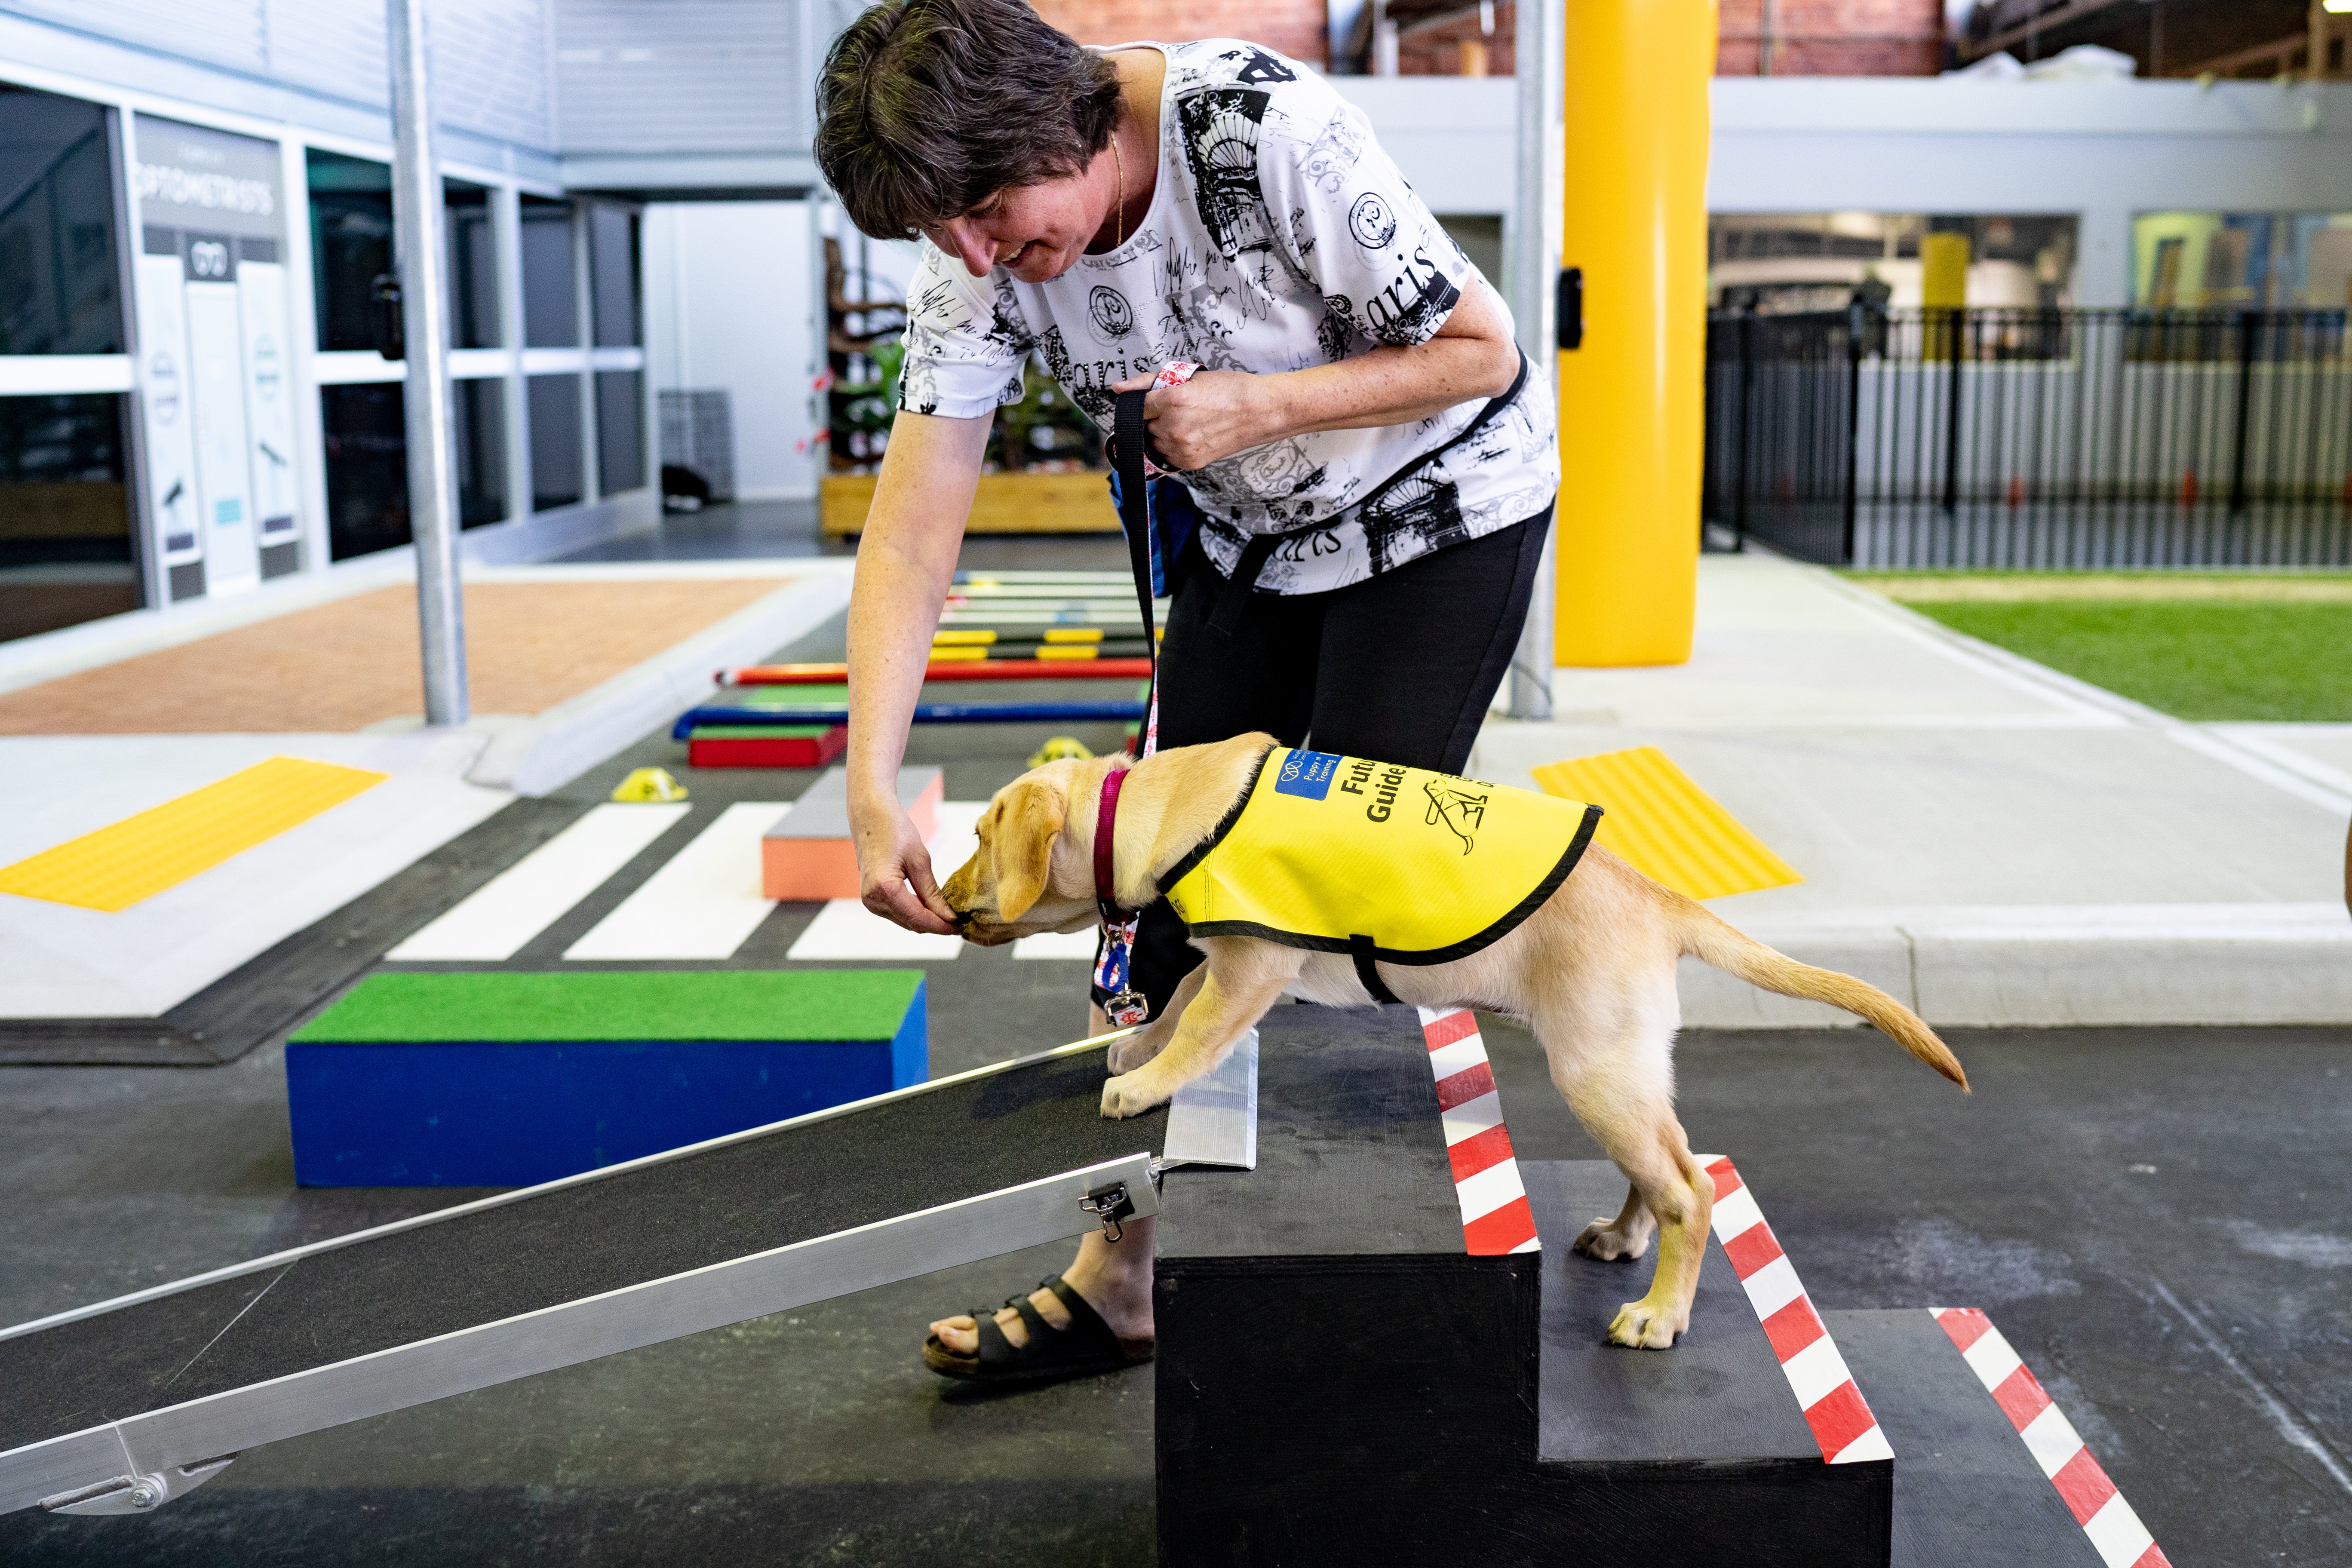 A volunteer Puppy Raiser gives a treat to a future guide dog walking over an obstacle at a training center in Australia.